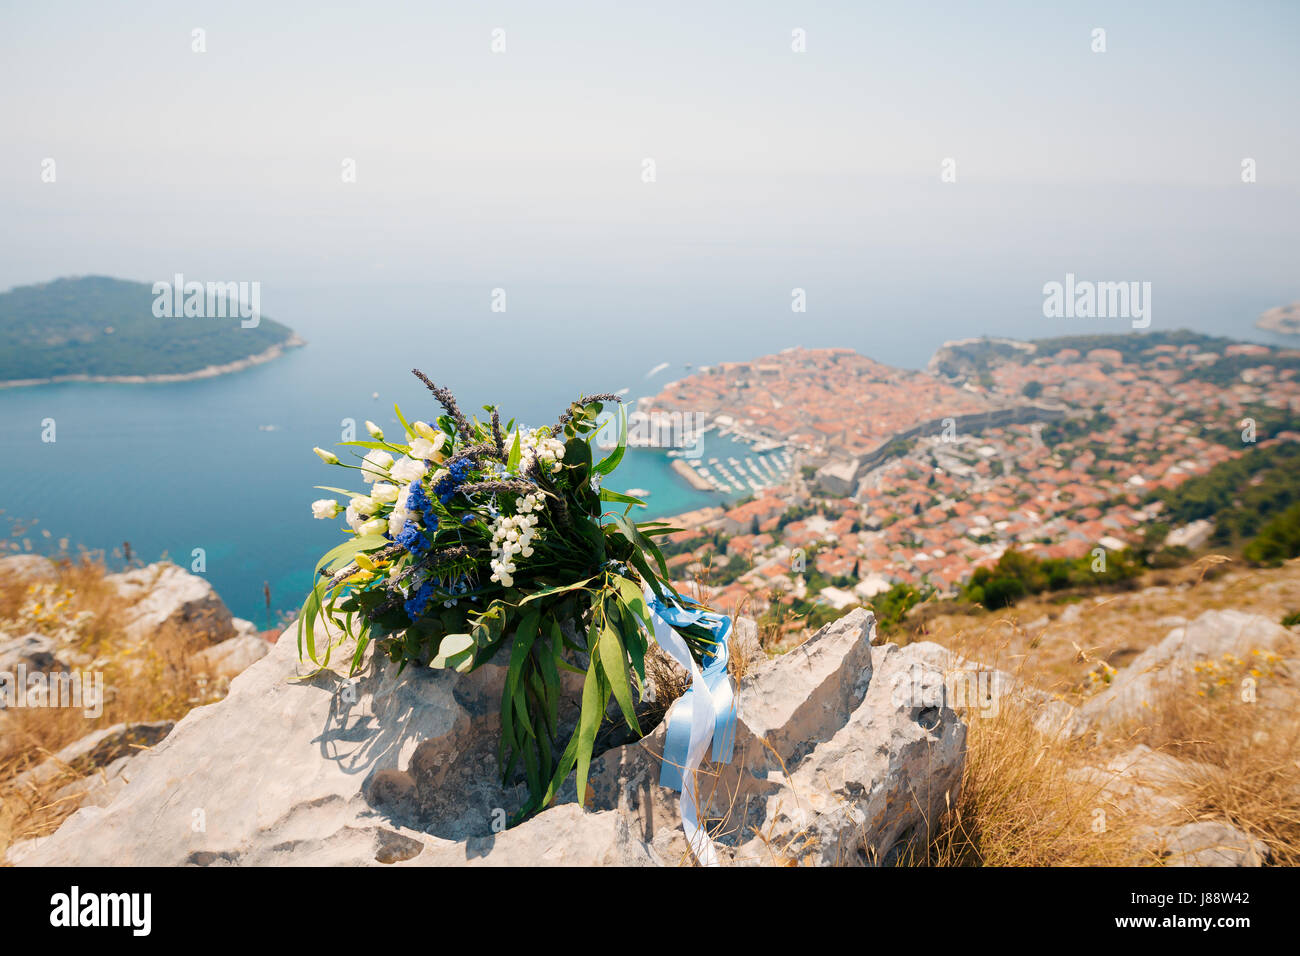 Wedding bridal bouquet of roses, lisianthus, lavender, Gypsophila, Verdure Italian on the stone with the background of Dubrovnik, the view from the ob Stock Photo